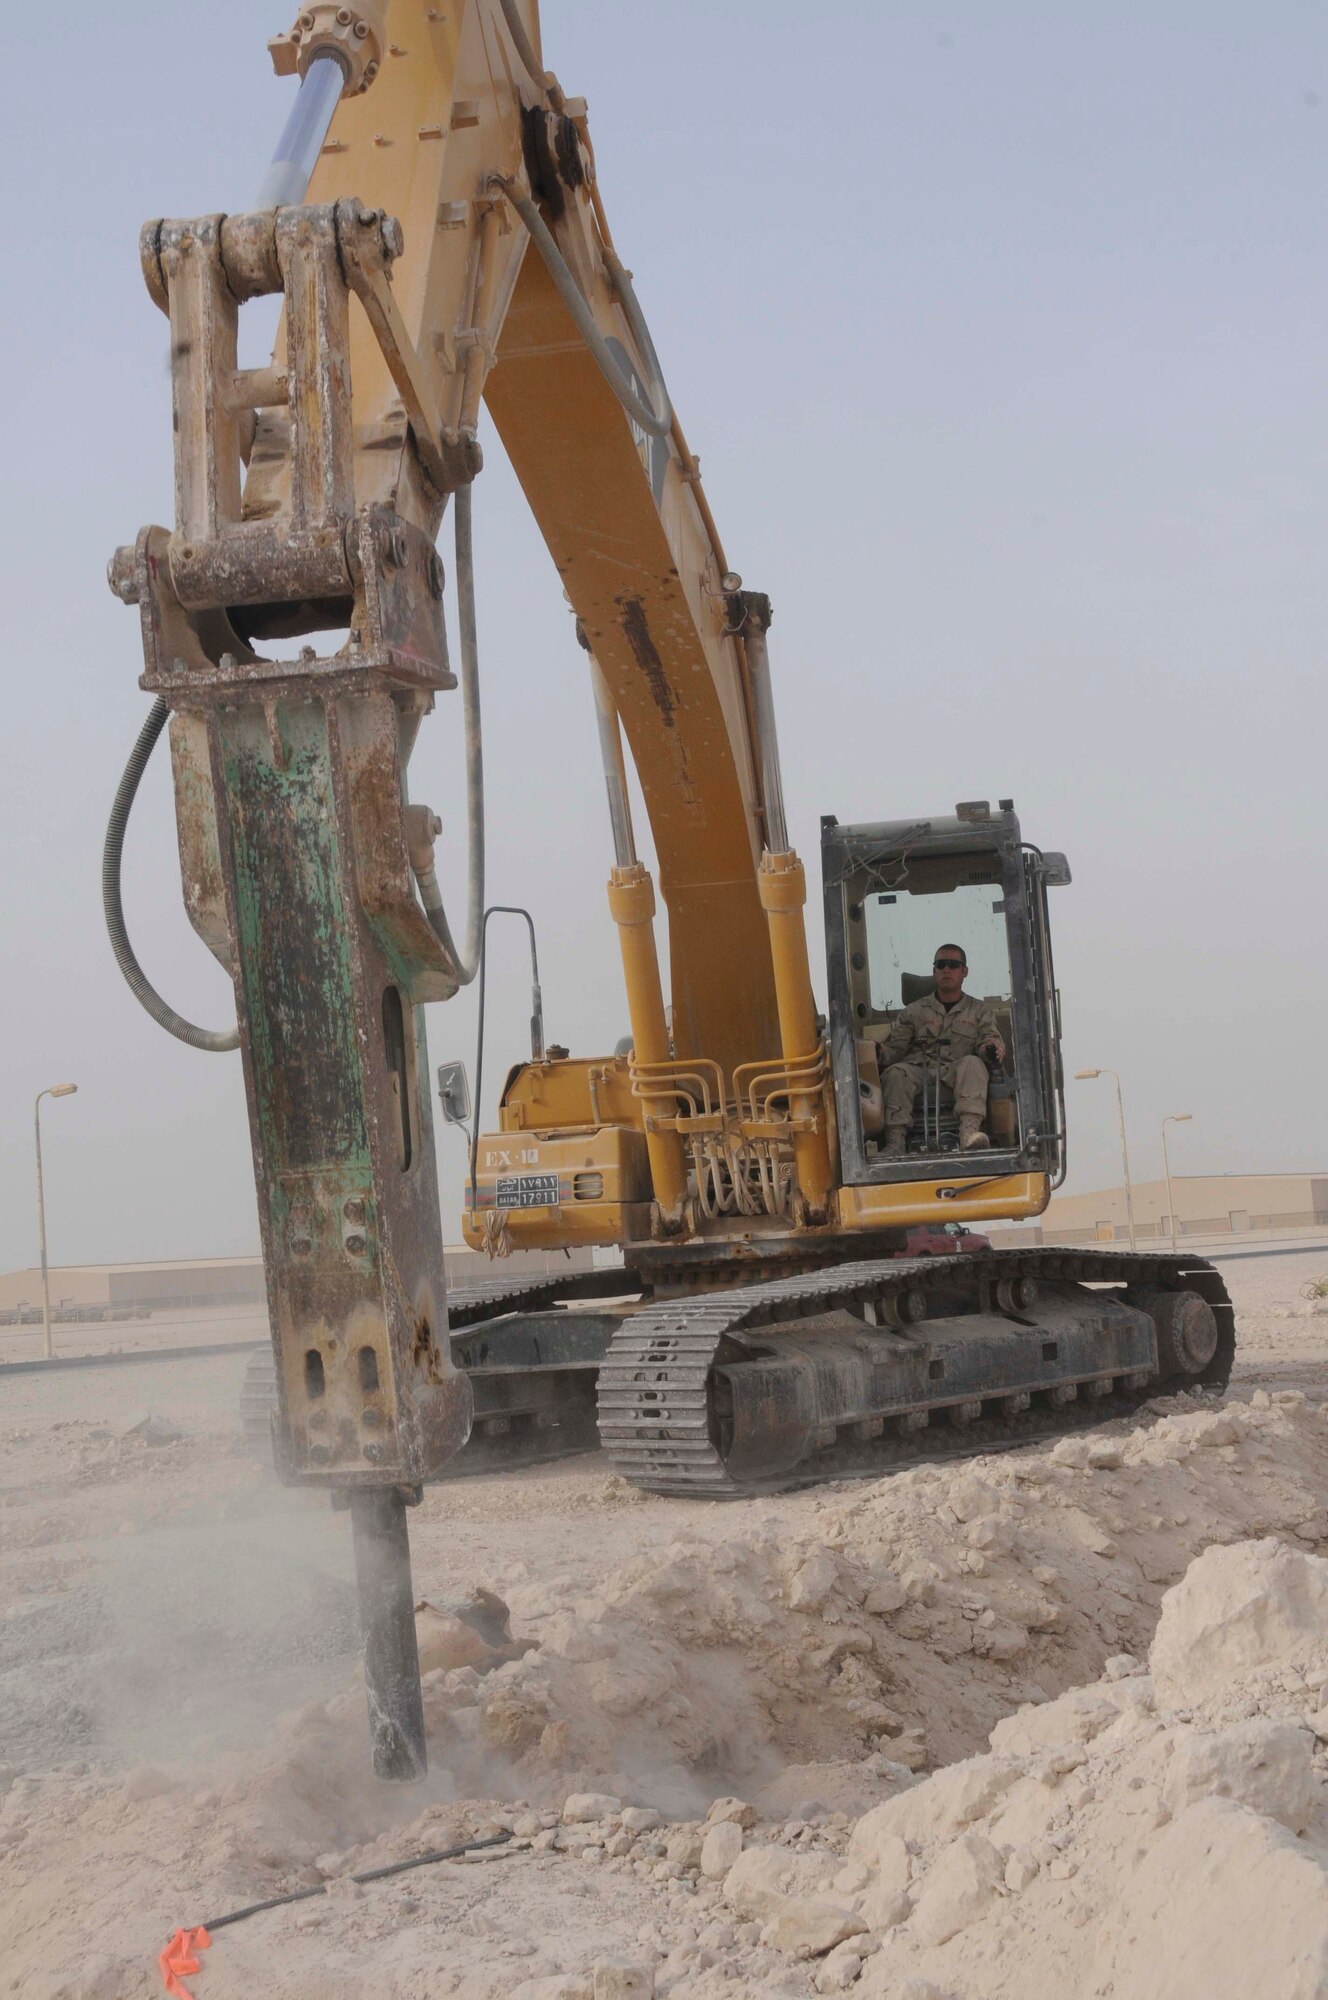 Staff Sgt. David Dengate, a pavement and construction equipment operator with the 379th Expeditionary Civil Engineer Squadron, uses an excavator with a hydro hammer attachment to loosen the ground so it can be dug out Aug. 4, 2008, at an undisclosed location in Southwest Asia. Sergeant Dengate, a native of Detroit, Mich., is deployed from McConnell Air Force Base, Kan. (U.S. Air Force photo by Staff Sgt. Darnell T. Cannady/RELEASED)